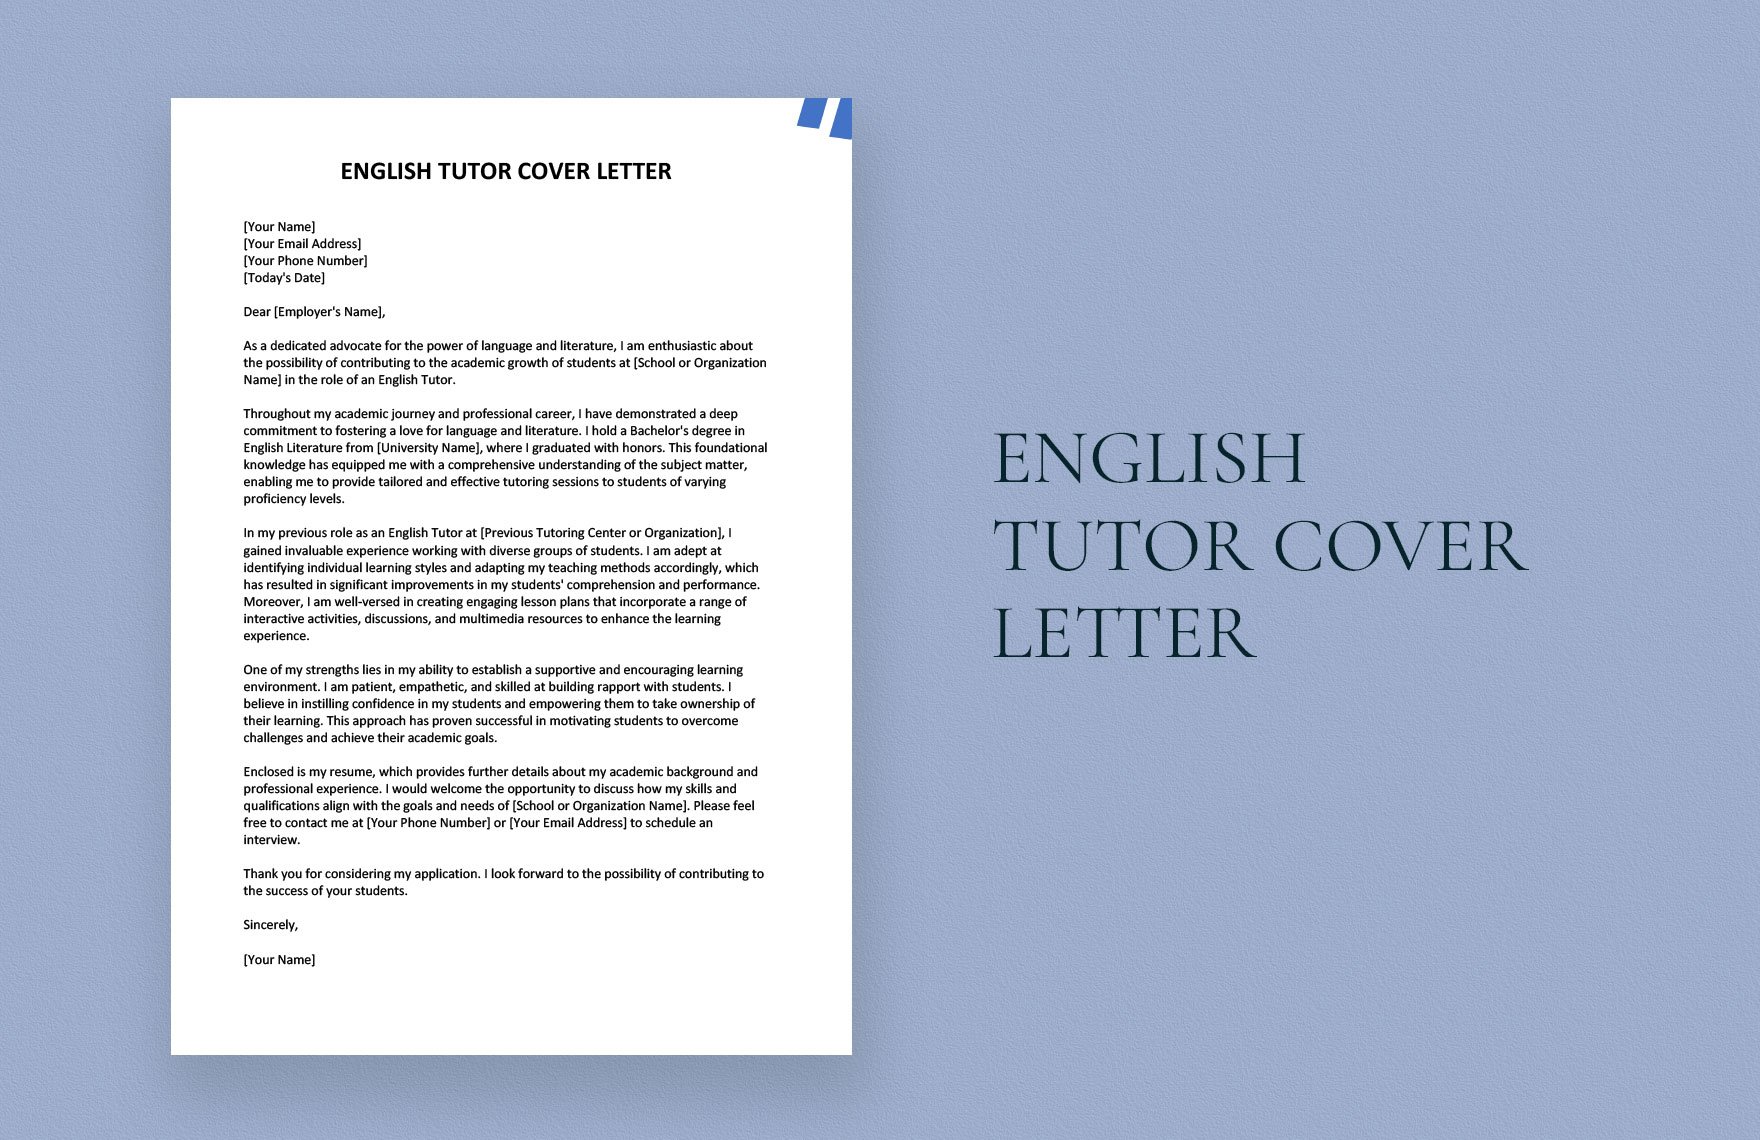 English Tutor Cover Letter in Word, Google Docs